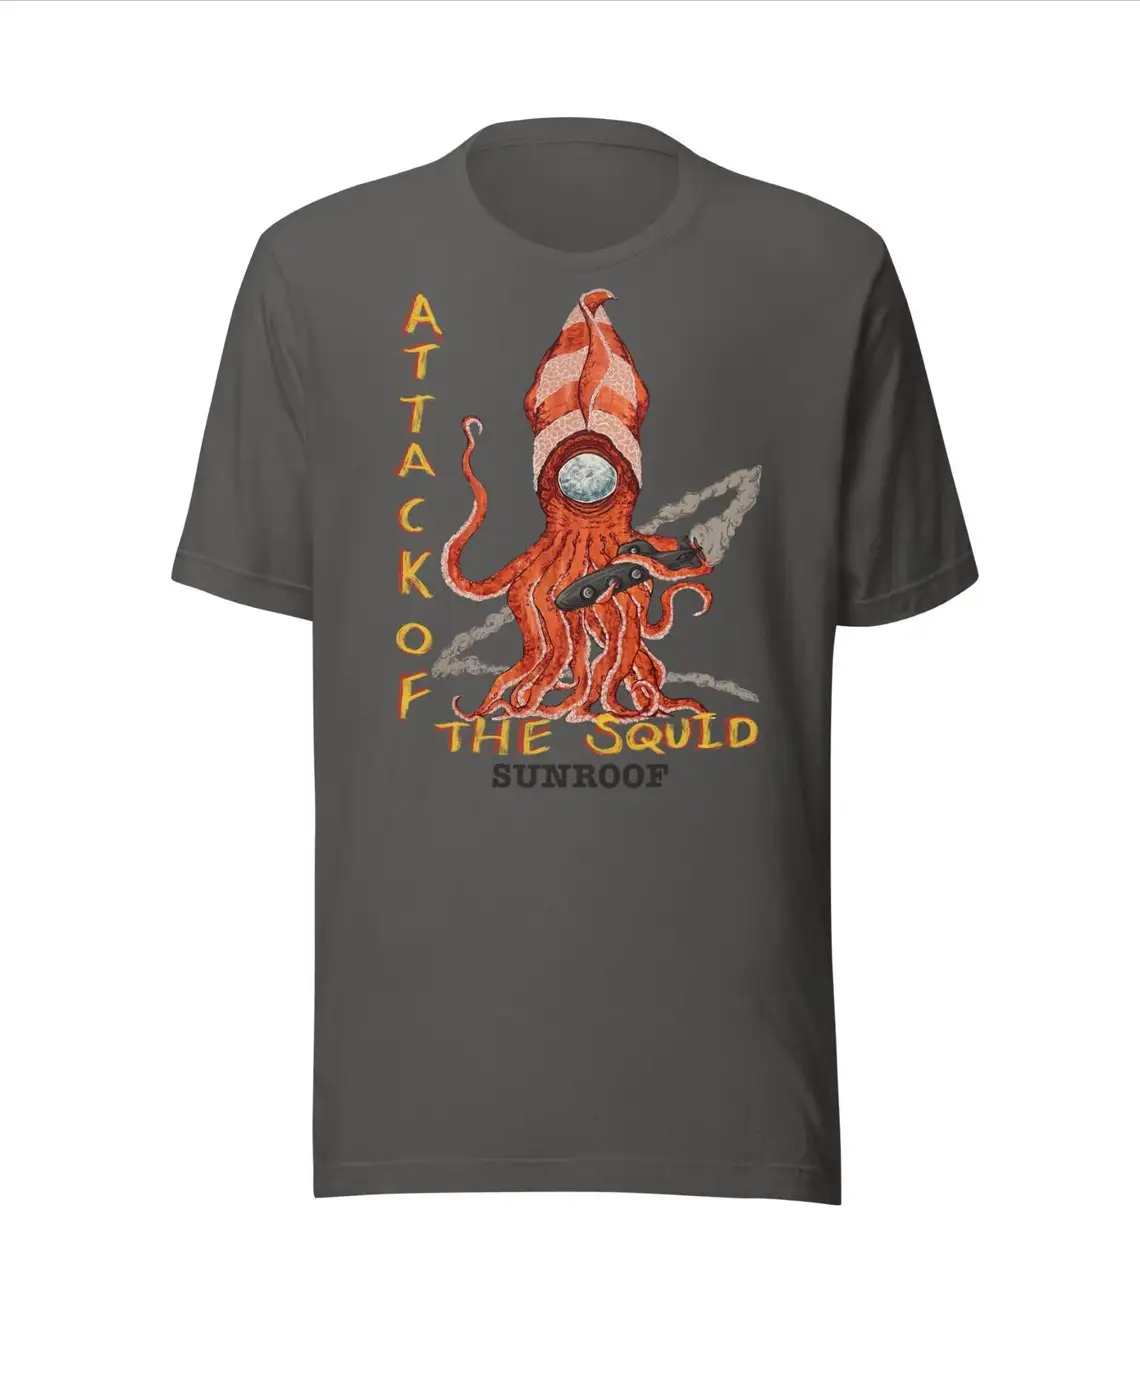 

Attack of The Squid T-Shirt 100% Cotton O-Neck Summer Short Sleeve Casual Mens T-shirt Size S-3XL